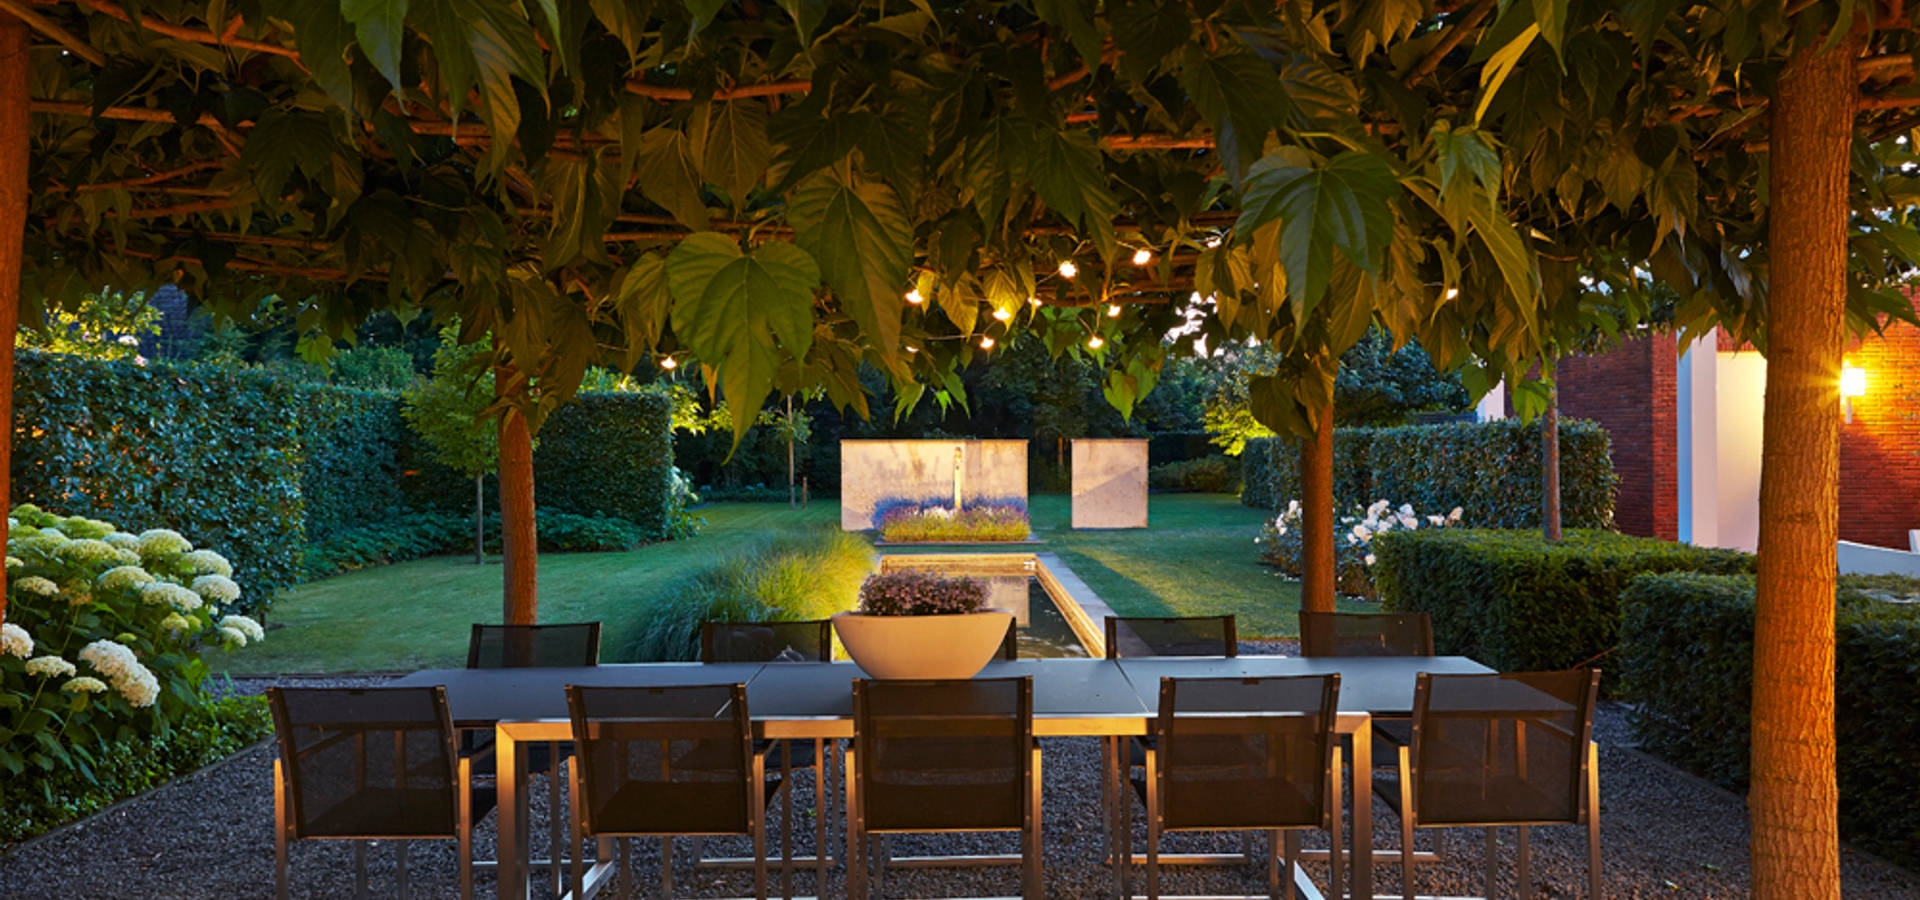 FLORERA , design and realisation gardens and other outdoor spaces.